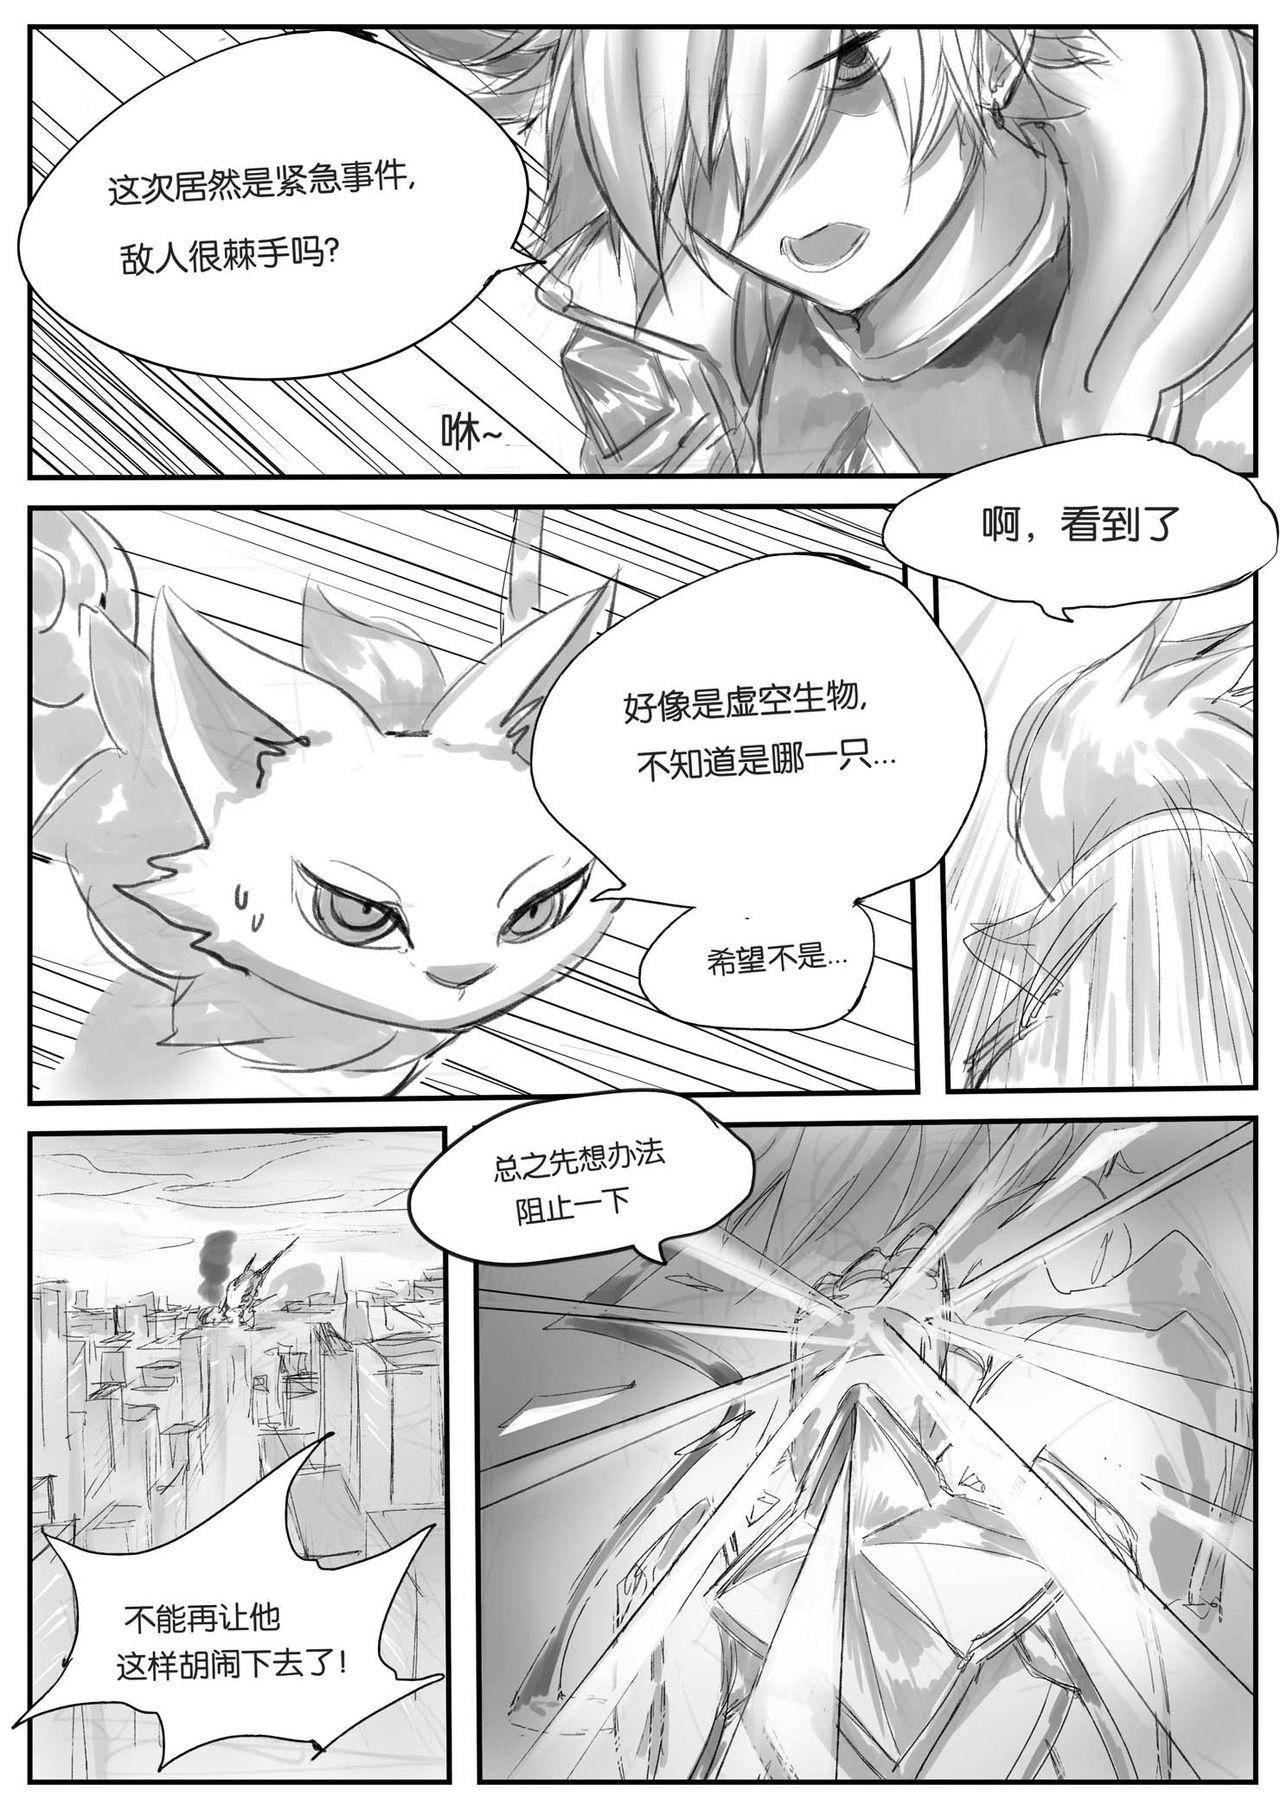 Free Petite Porn 守护者之Xing - League of legends Boys - Page 10